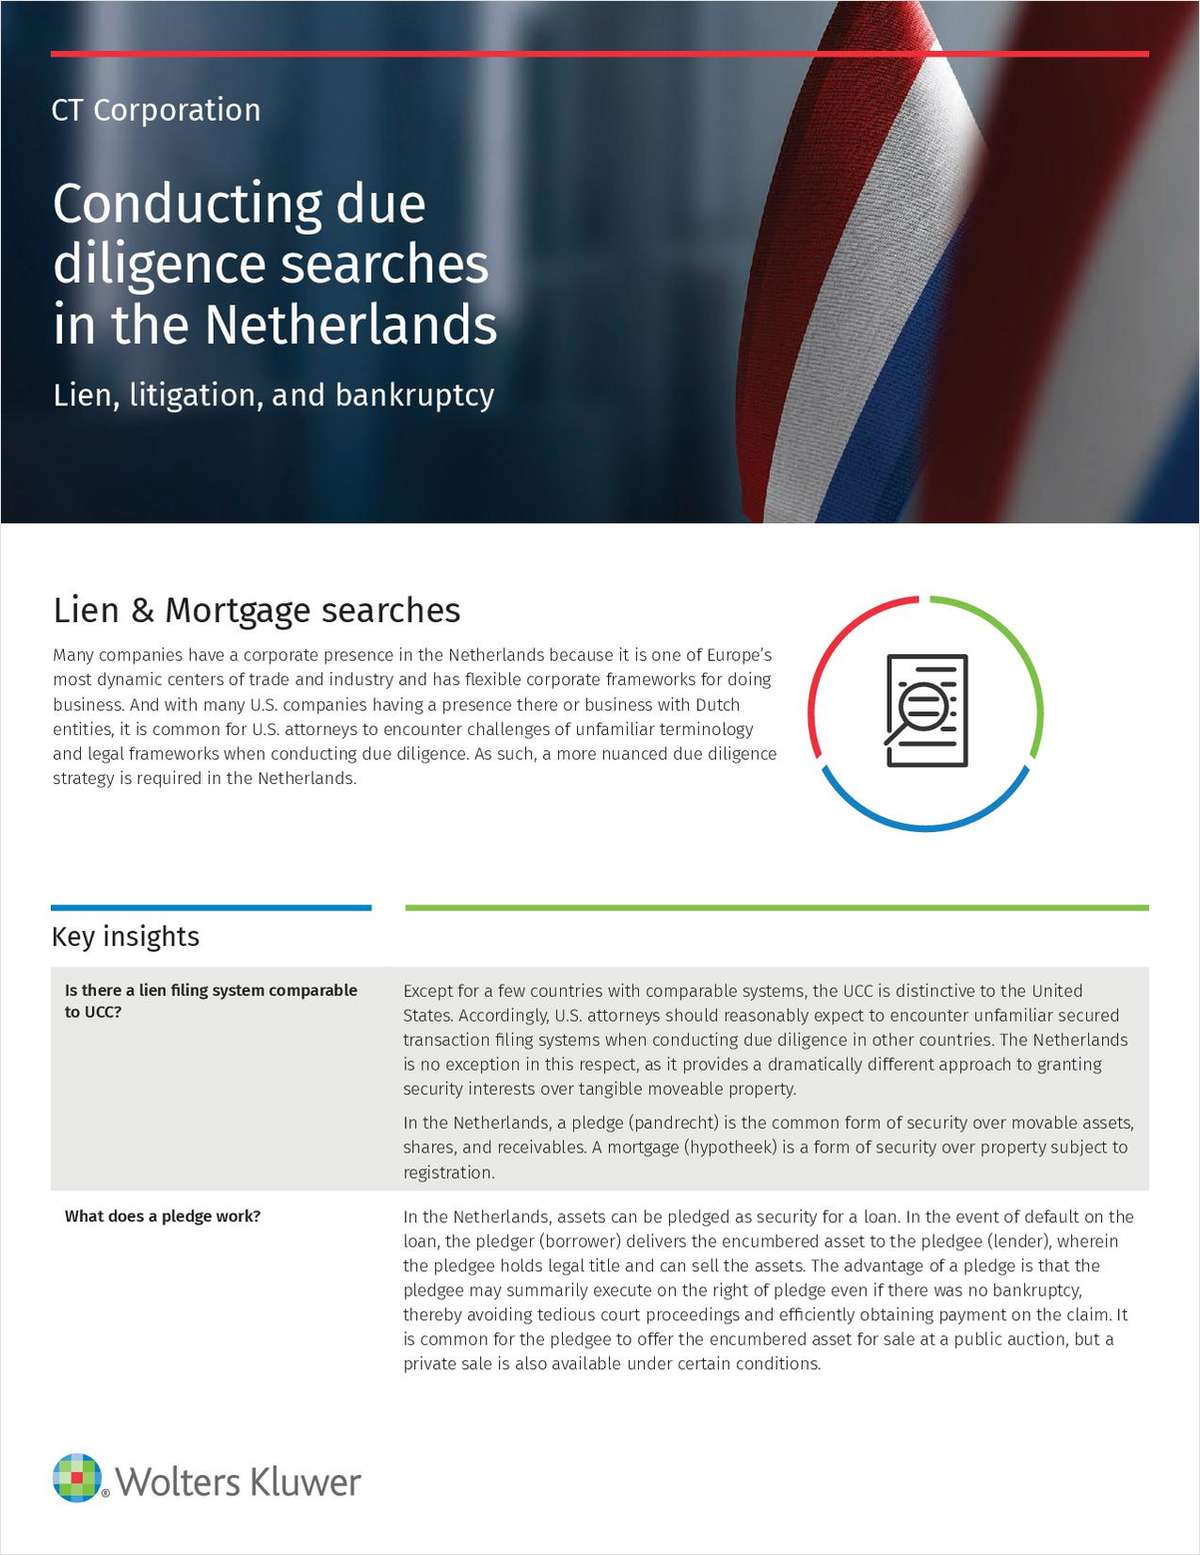 This guide offers insights for lawyers conducting due diligence searches in the Netherlands. Download it now to learn about lien, litigation, and bankruptcy searches in this country.